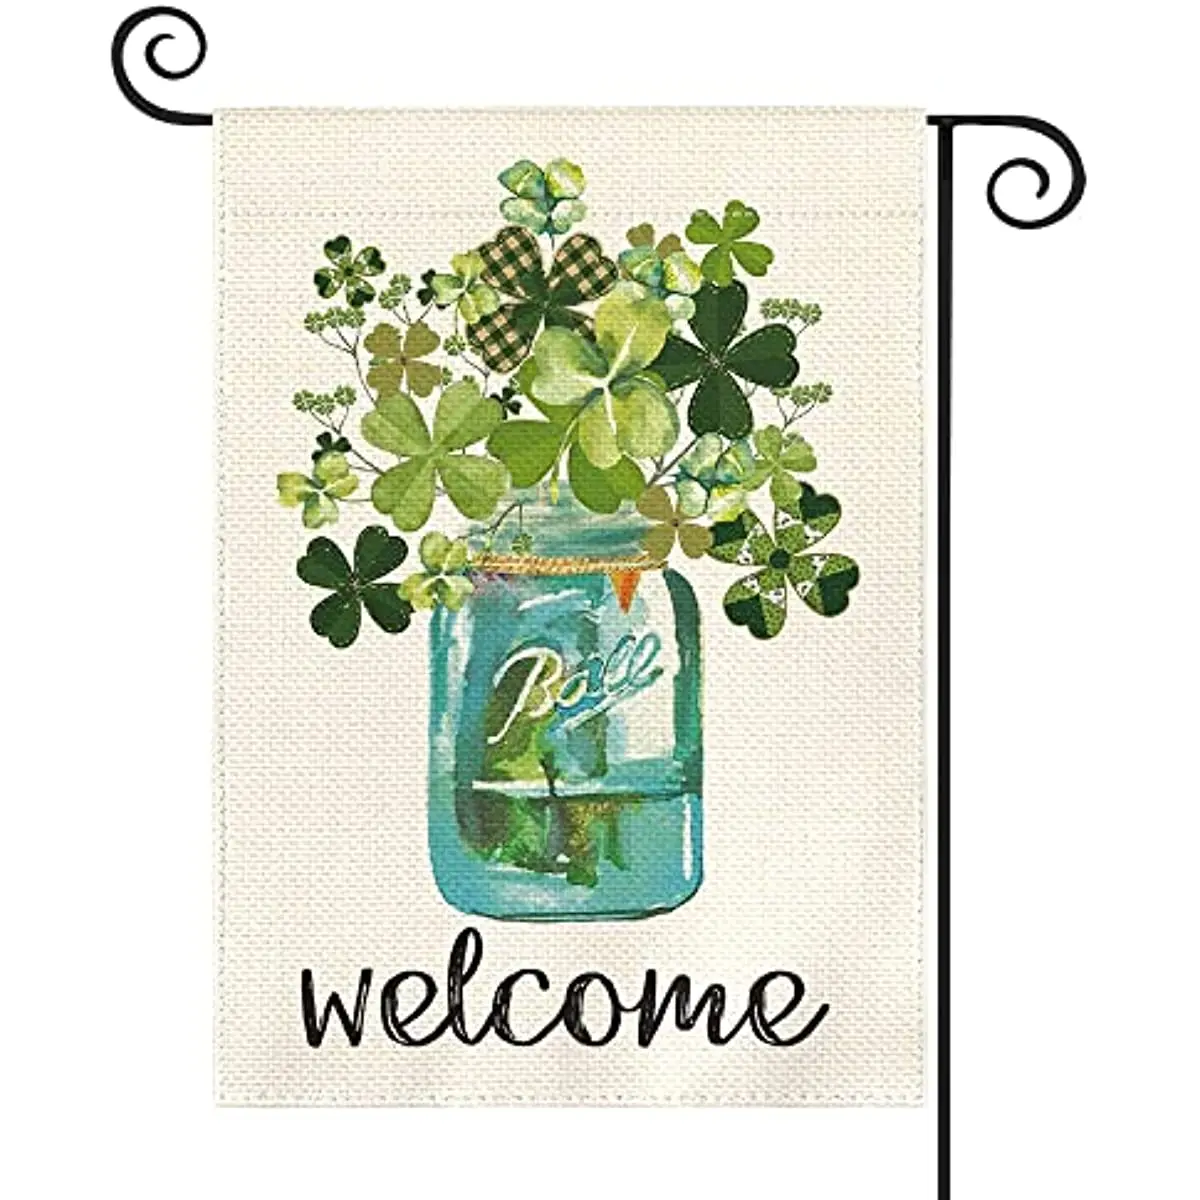 

Watercolor Welcome Lucky Clover St Patricks Day Garden Flag Double Side Shamrock Jar Yard Outdoor Flag 12x18 Inch Holiday Decor